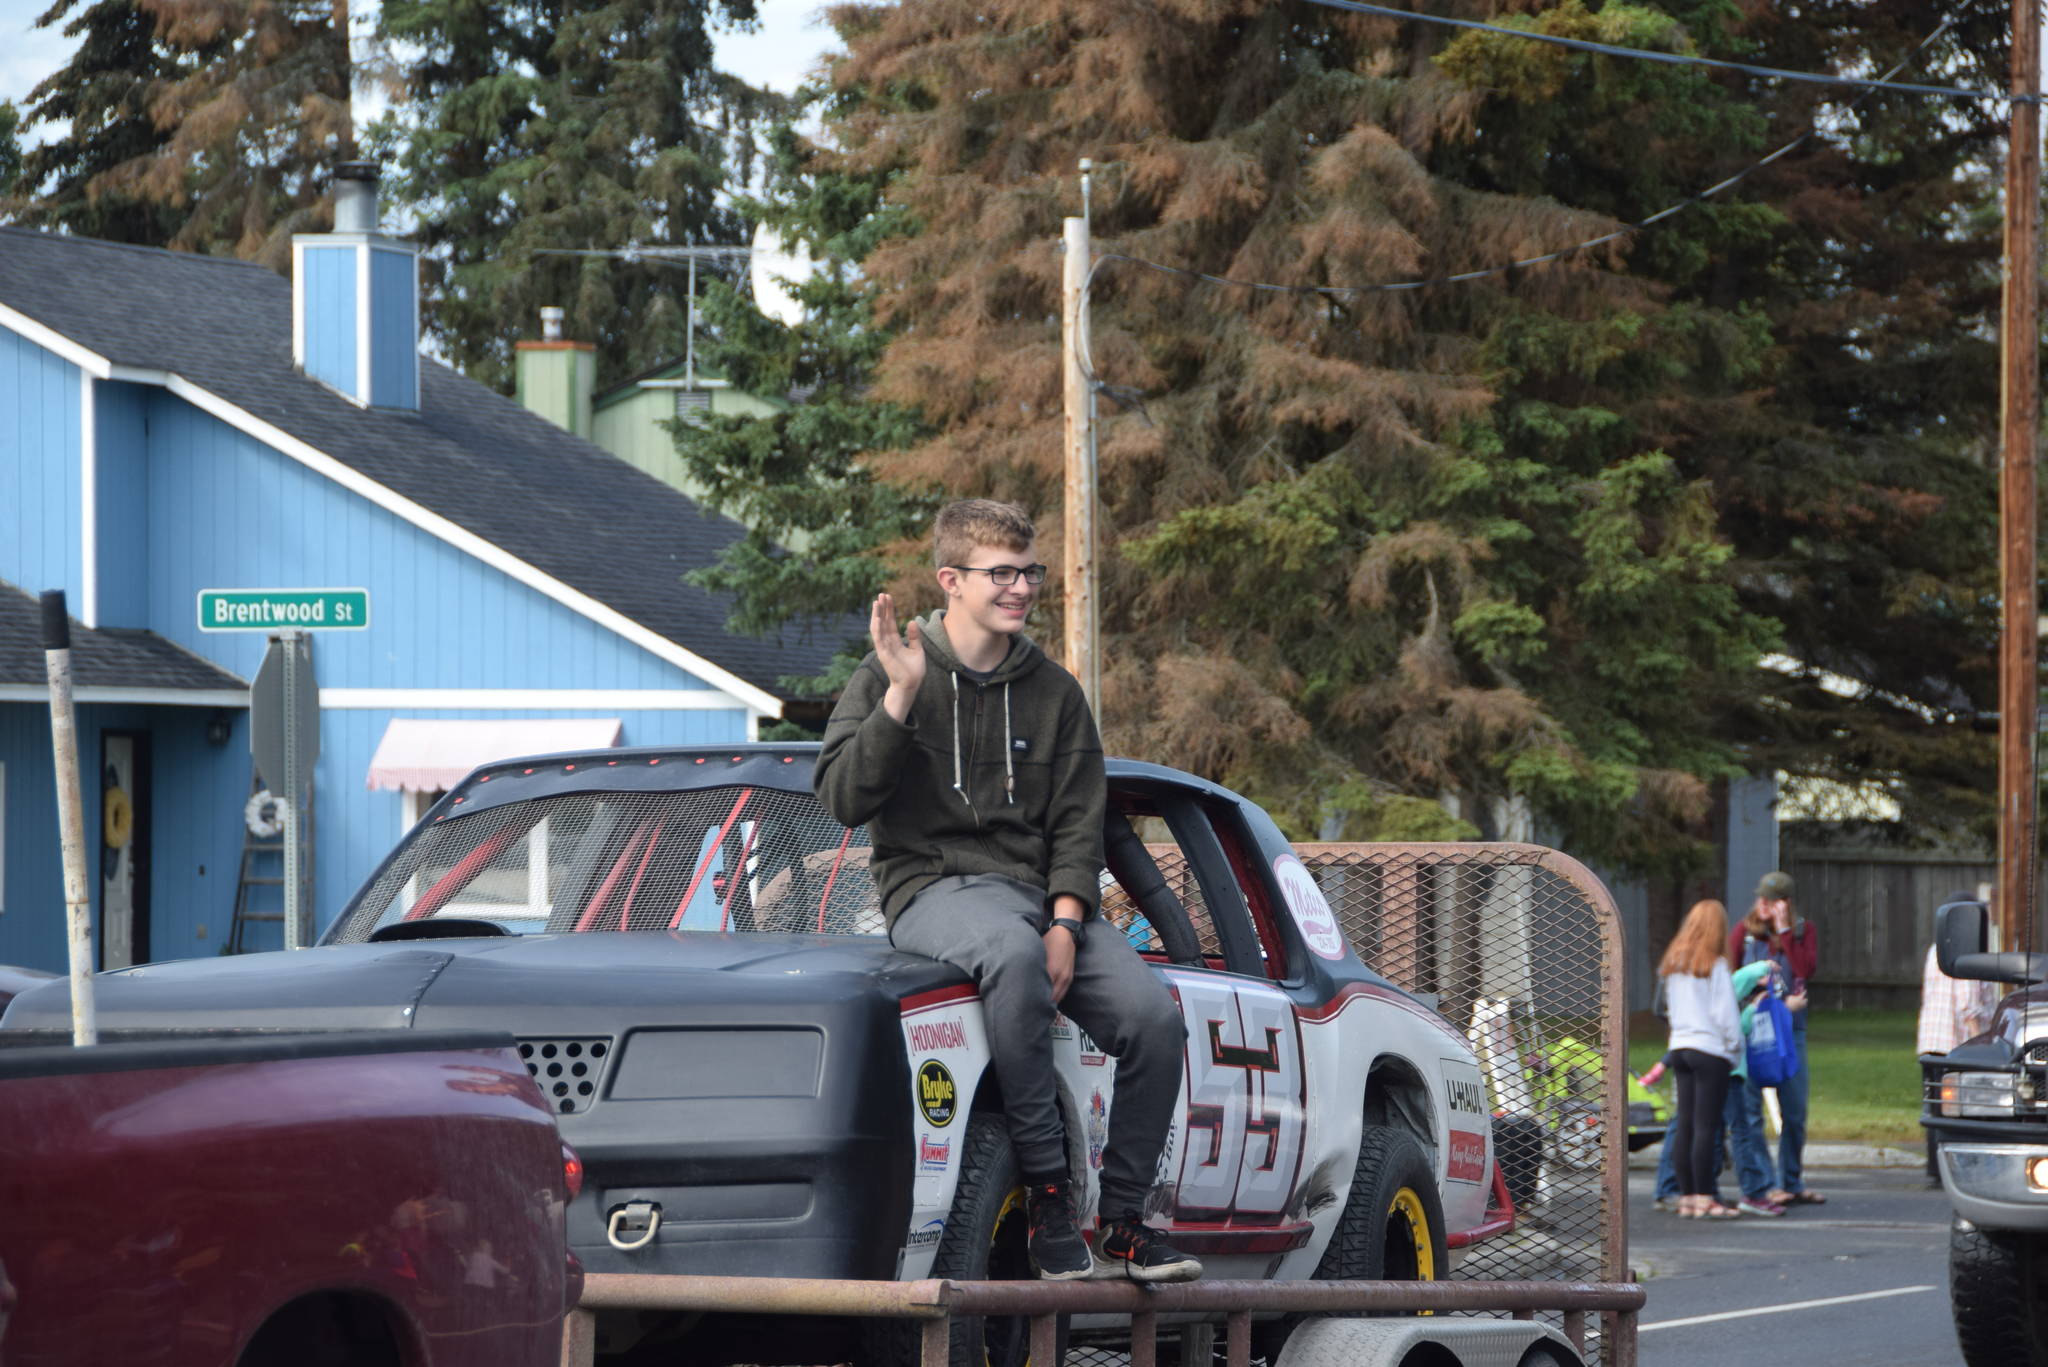 A volunteer from Twin City Raceway waves to the crowd during Soldotna’s Progress Day Parade in Soldotna, Alaska on July 27, 2019. (Photo by Brian Mazurek/Peninsula Clarion)